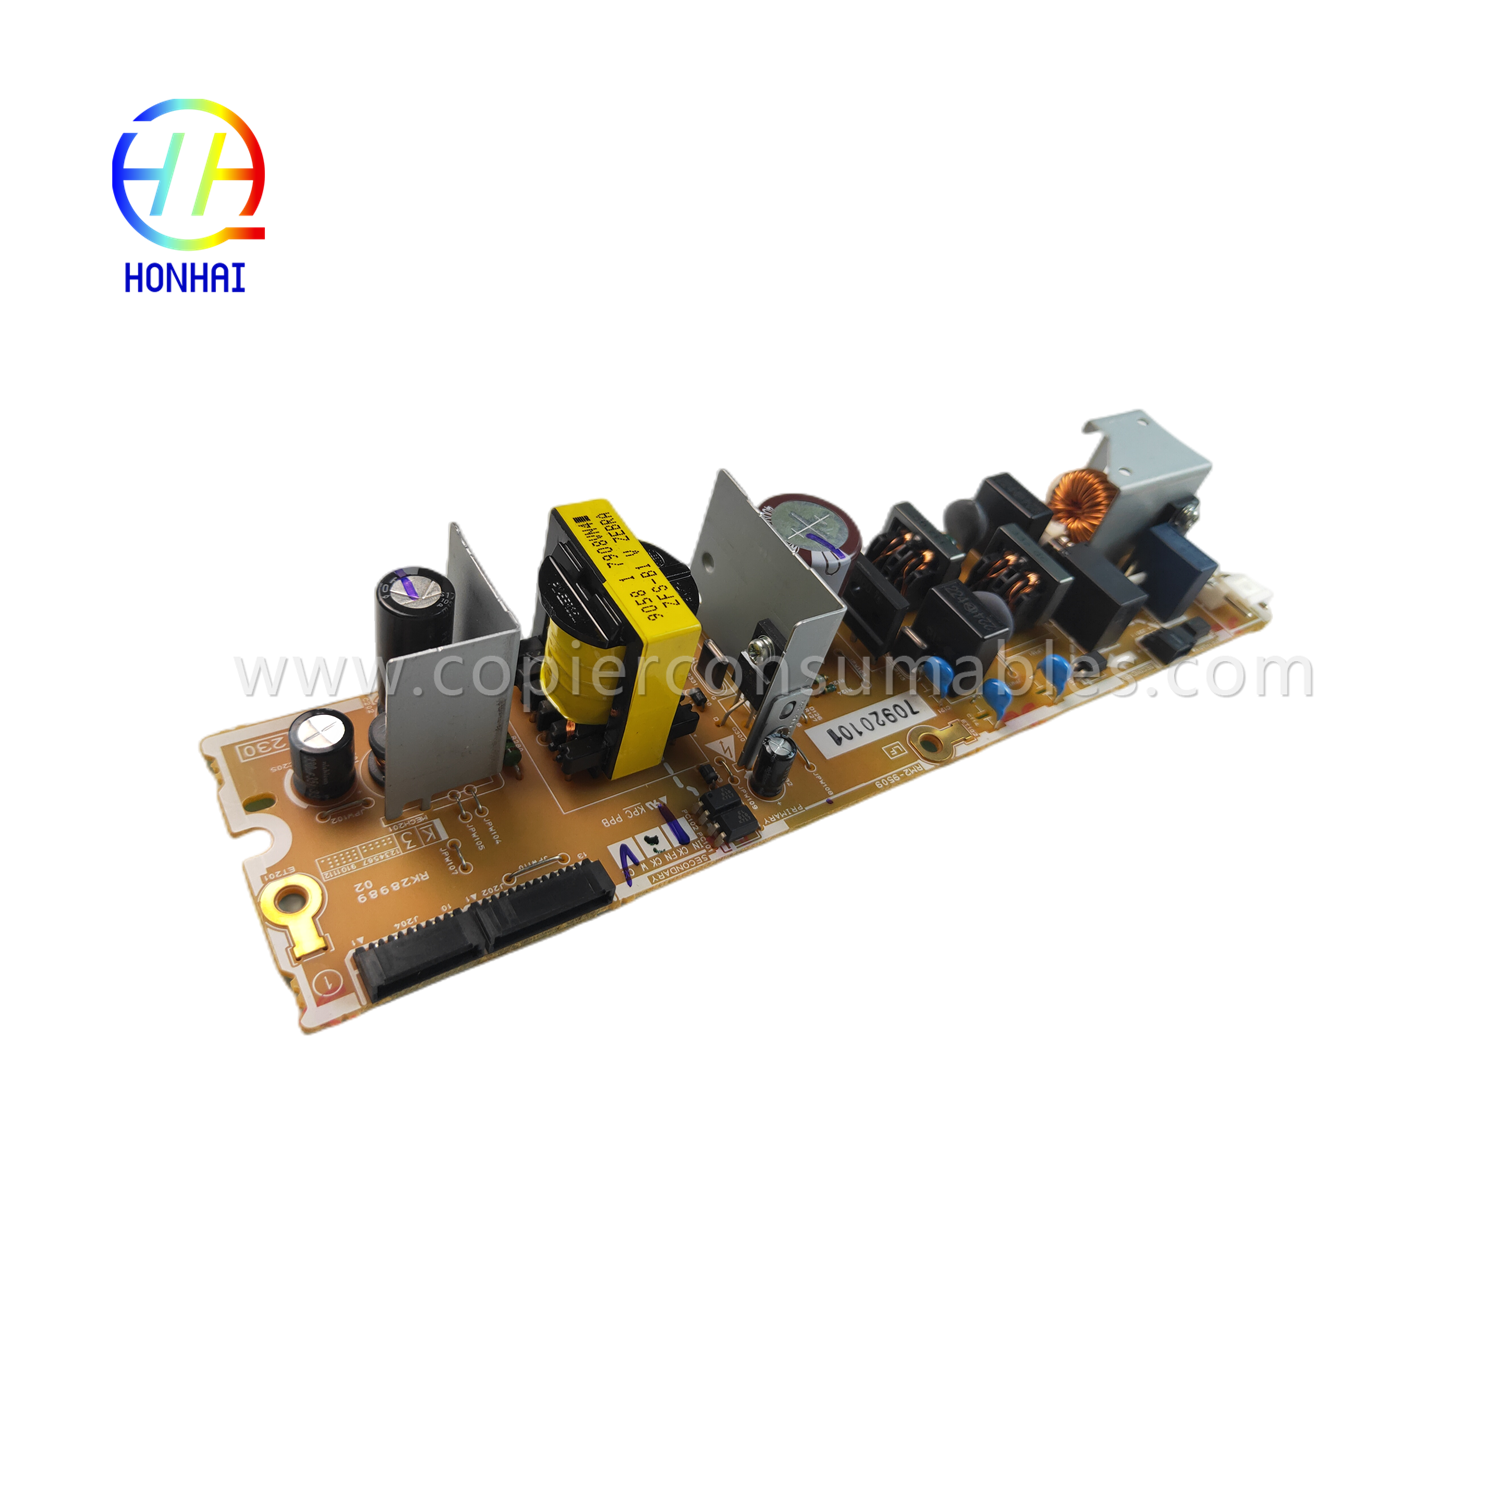 https://www.copierconsumables.com/power-supply-220v-for-hp-color-laserjet-pro-mfp-m283fdw-rm2-2428-product/